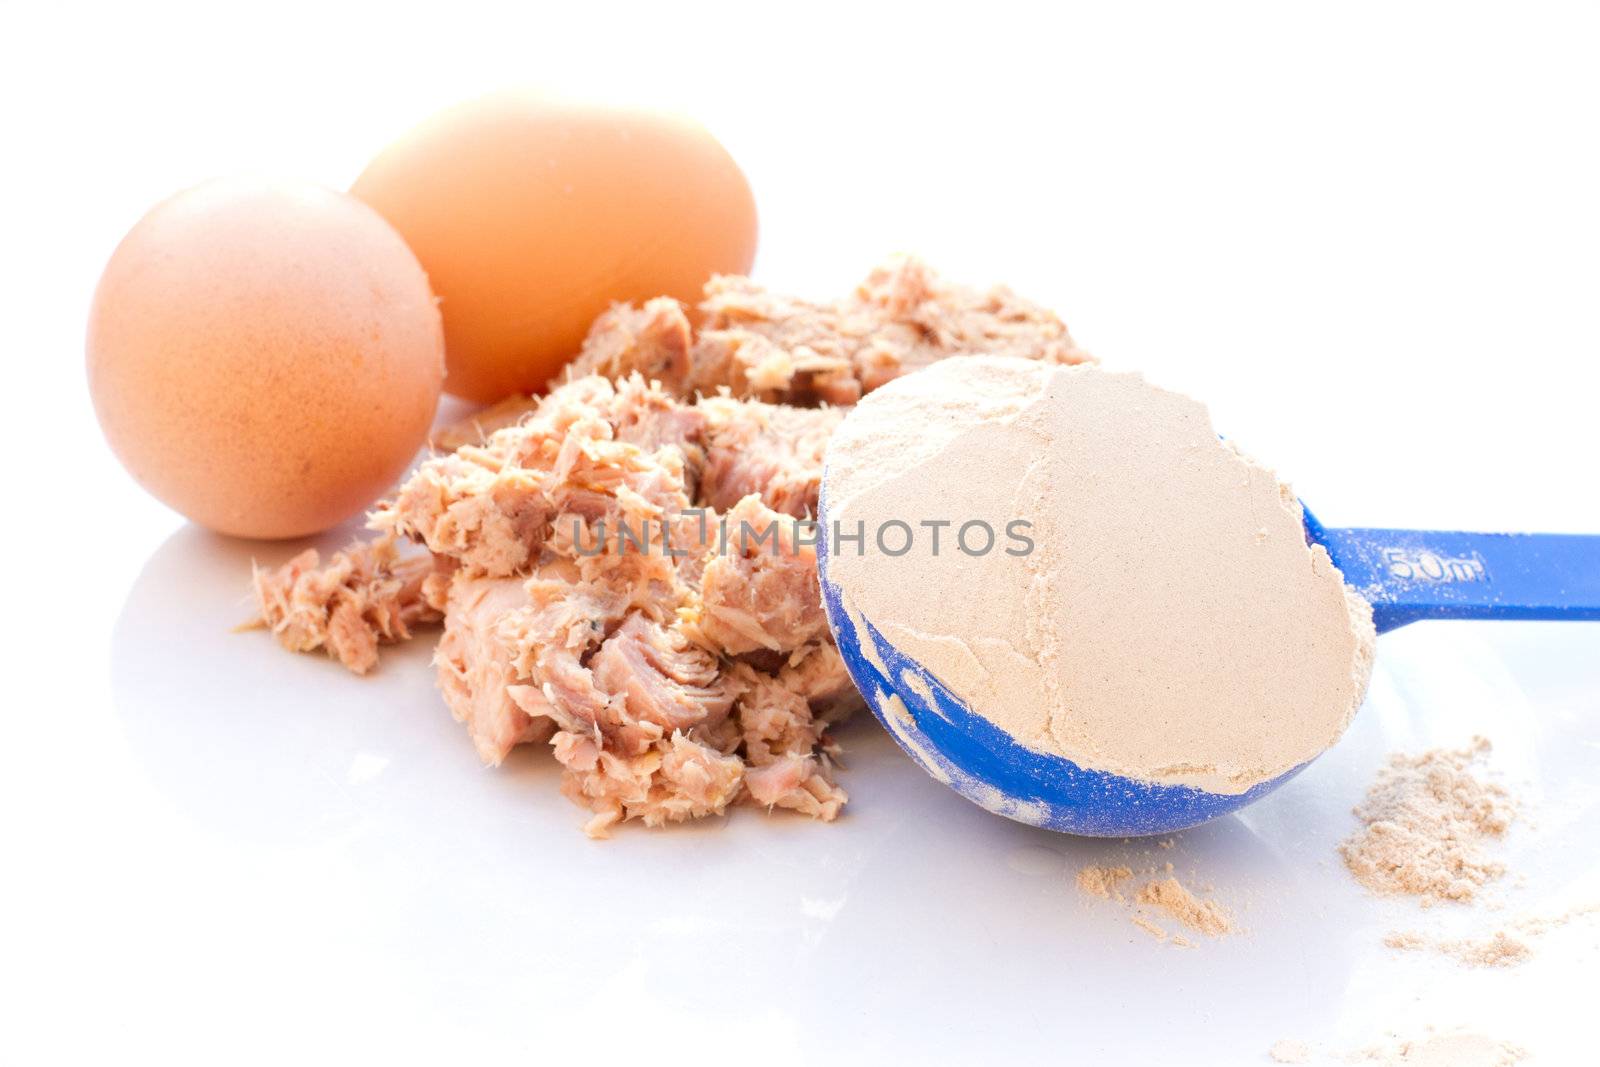 Tuna, egg and whey protein powder on a white plate